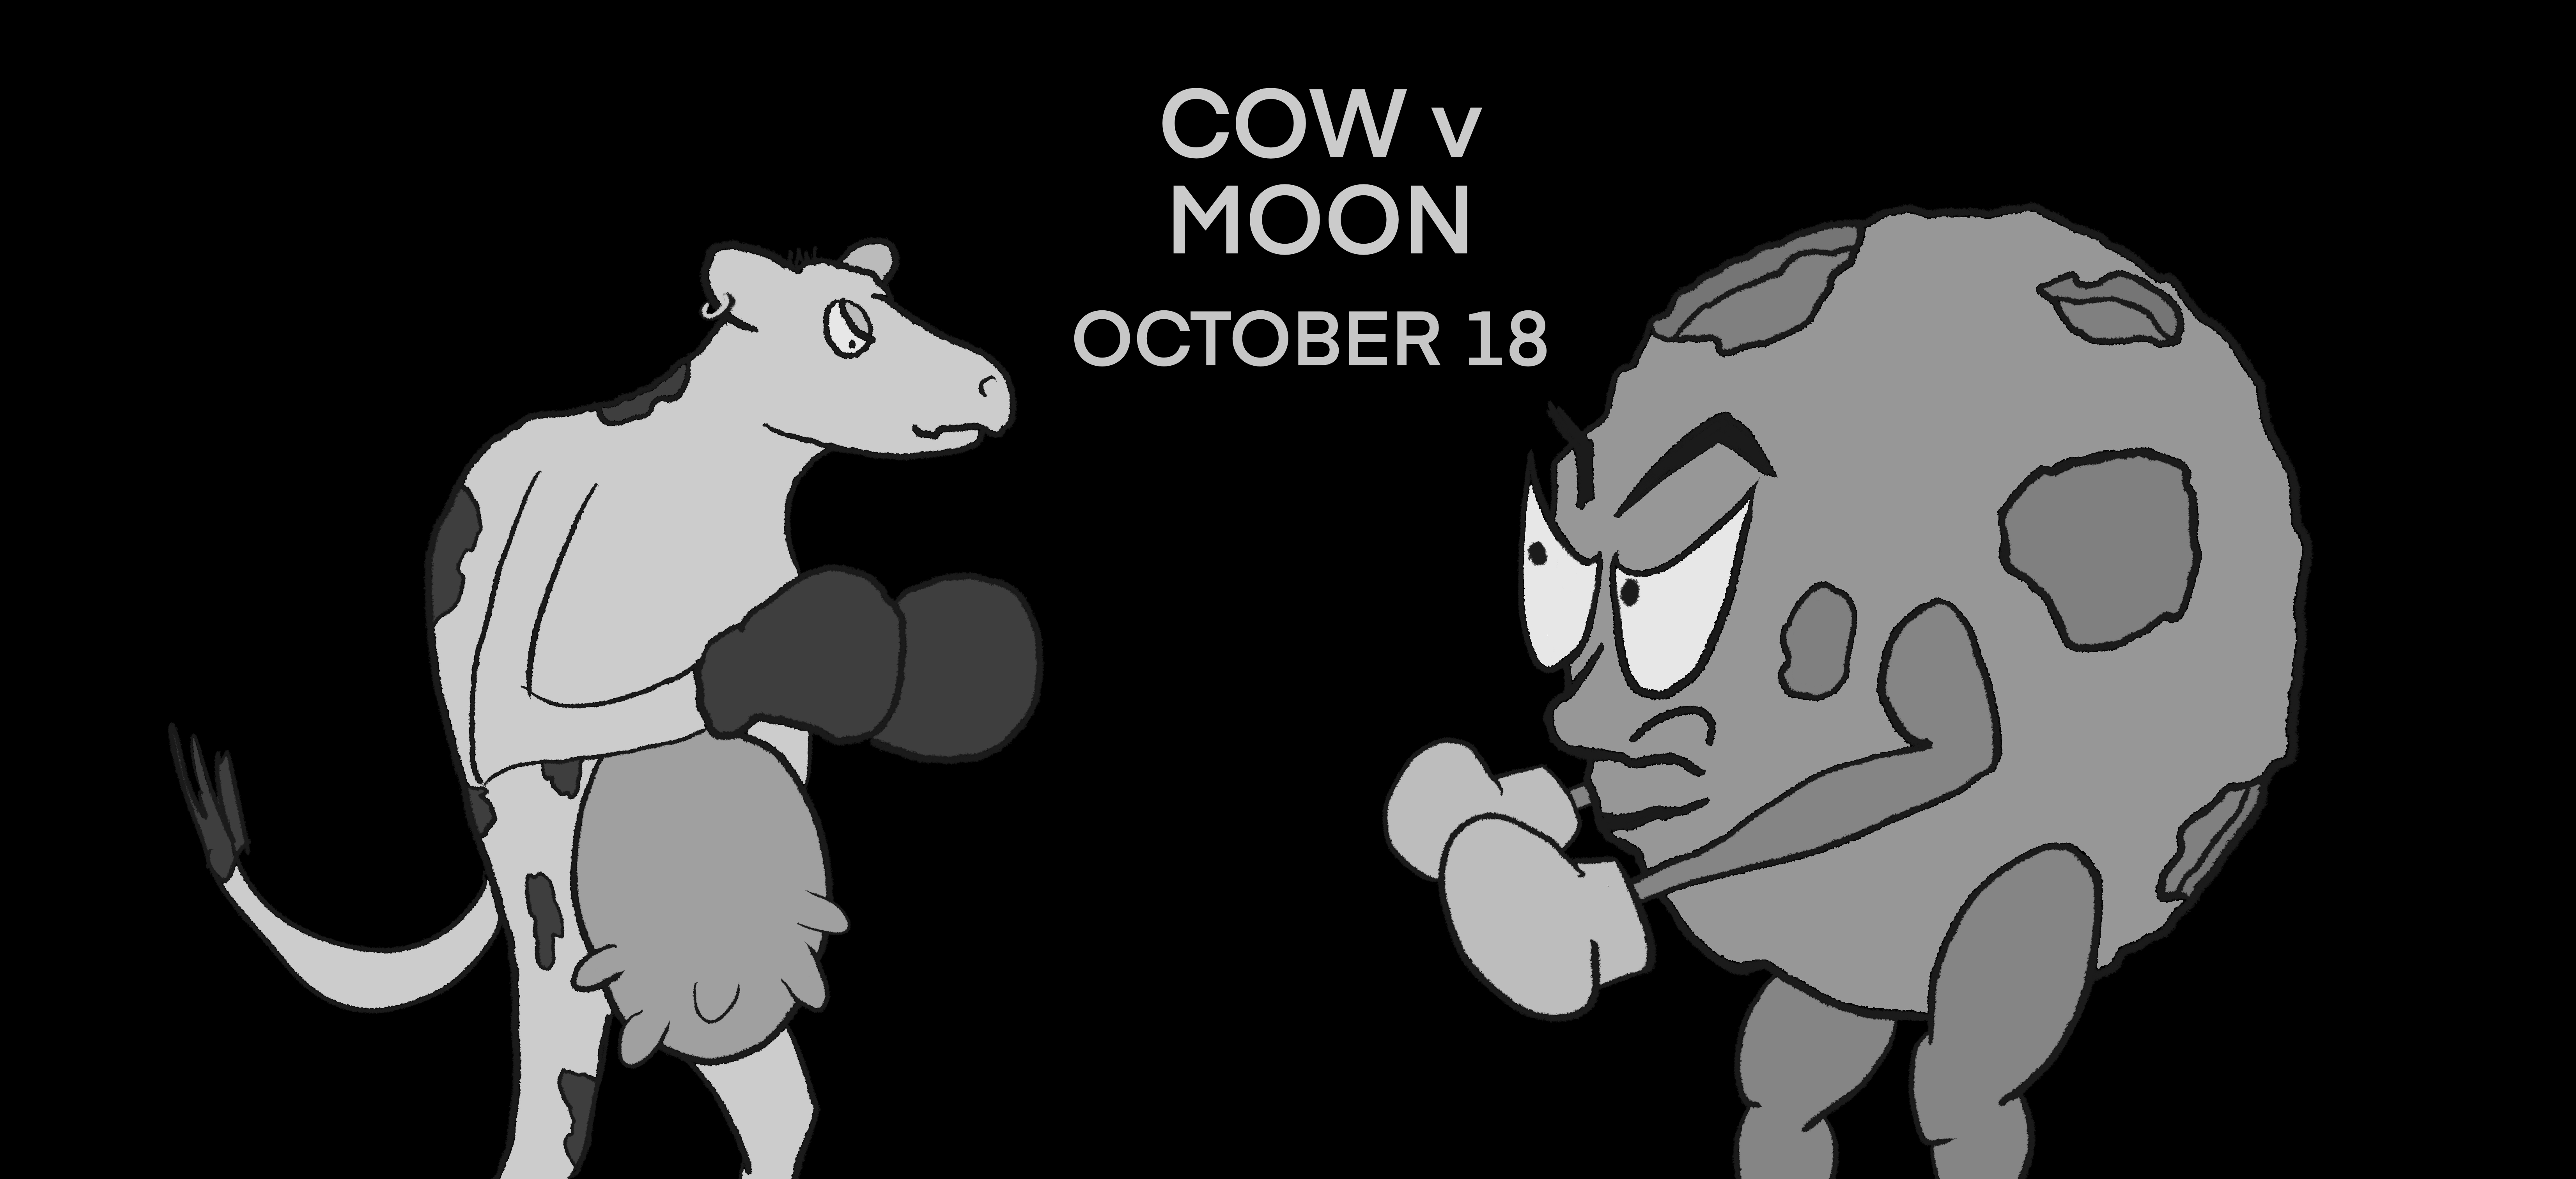 An anthropomorphic cow stands facing an anthropomorphic moon, in the style of a UFC fight poster